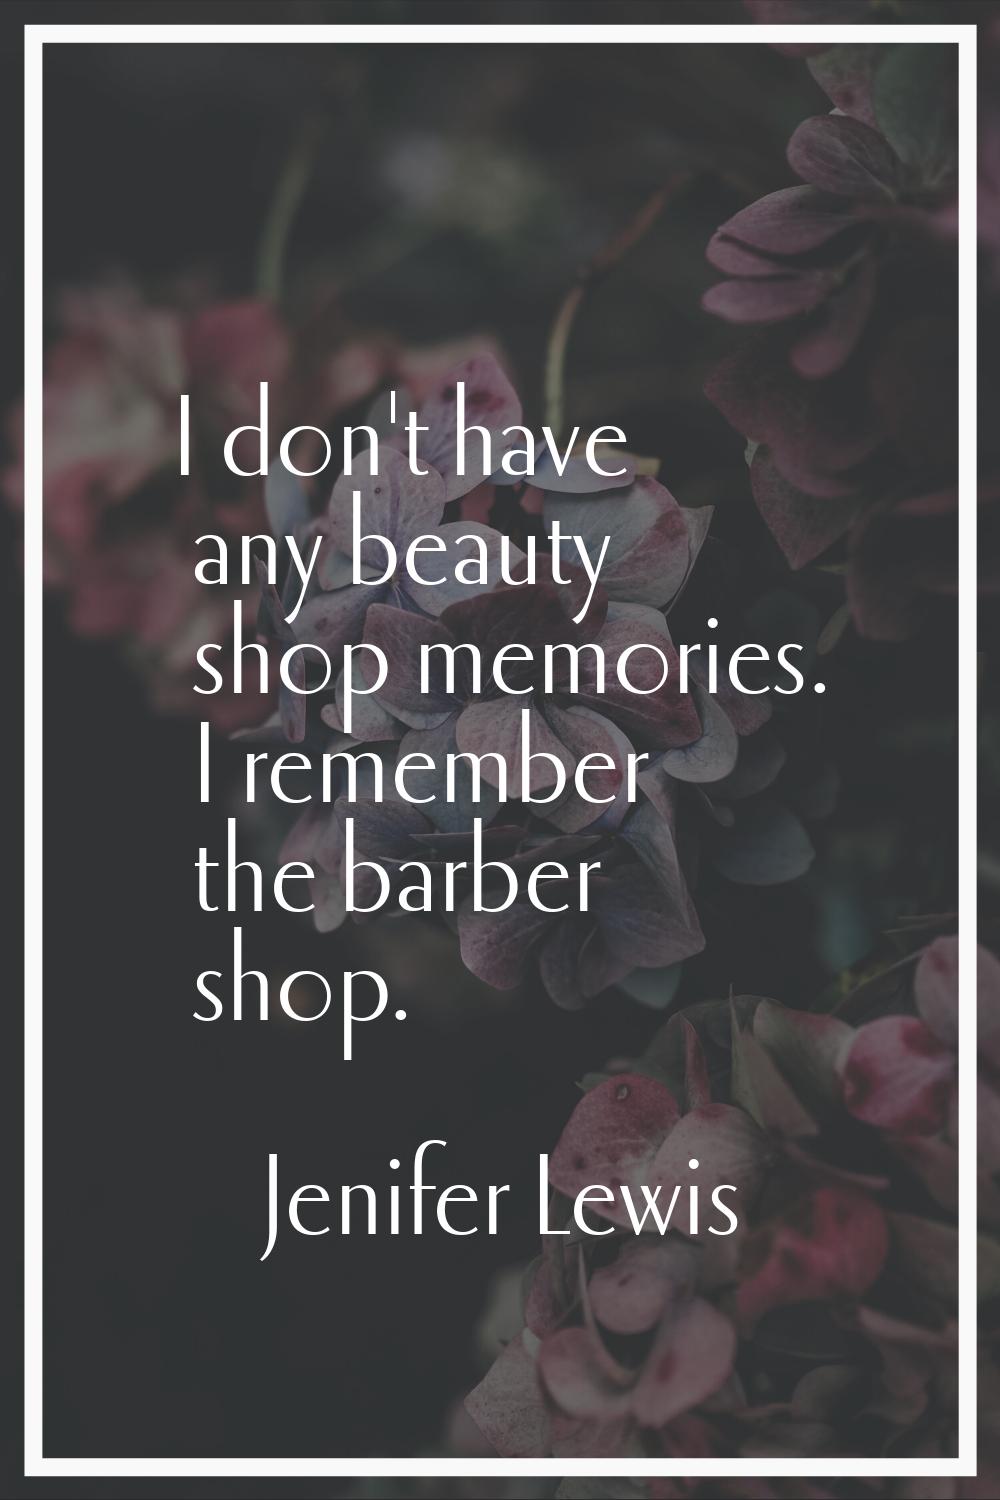 I don't have any beauty shop memories. I remember the barber shop.